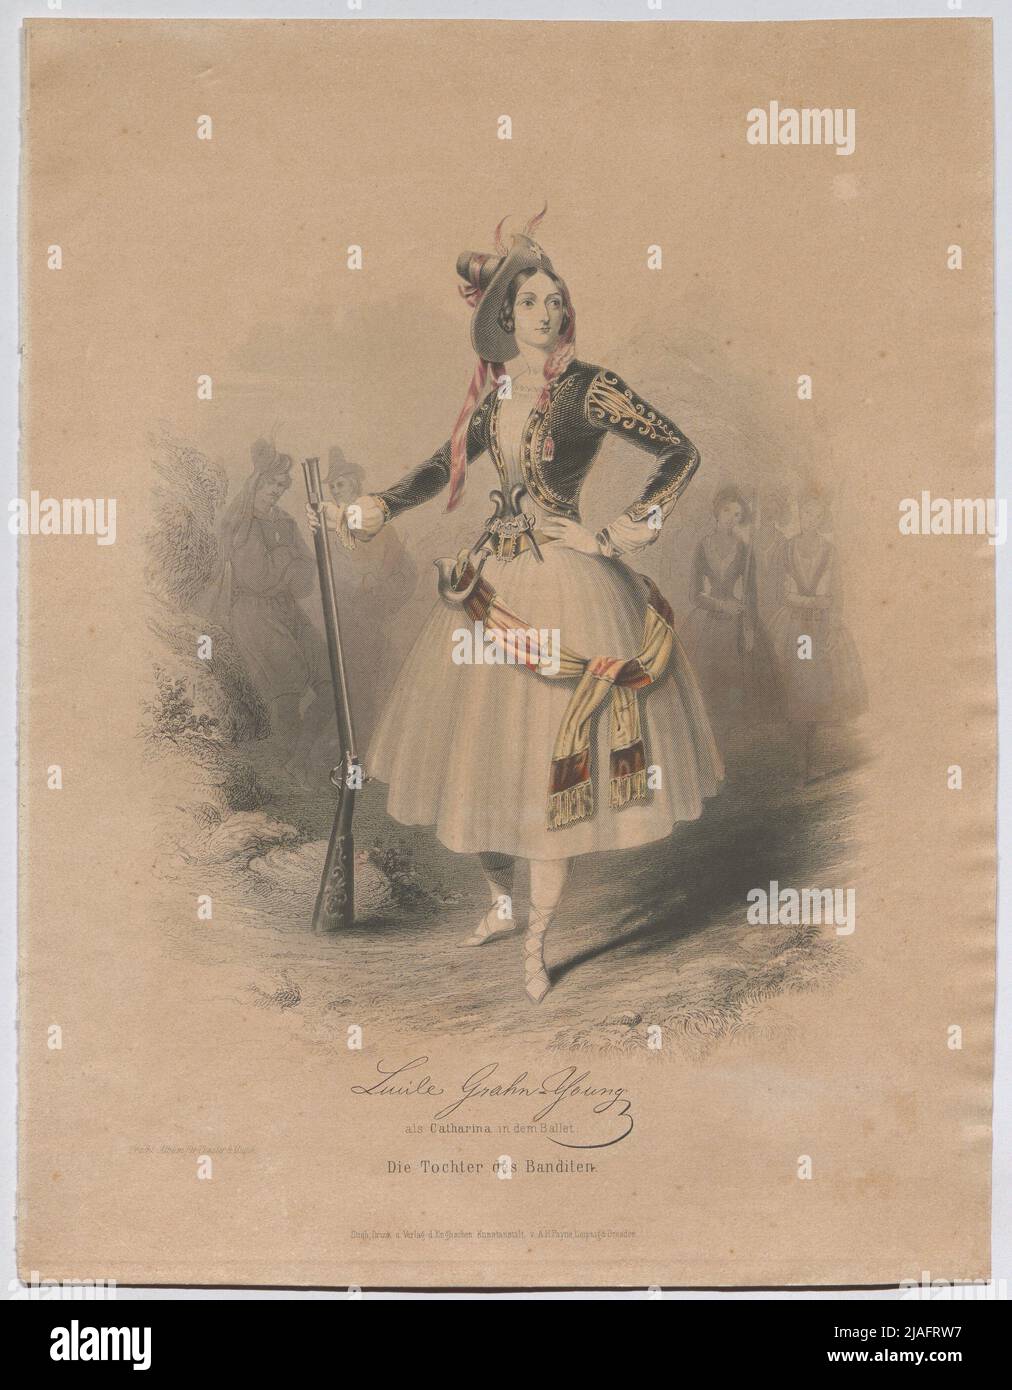 Lucile Grahn-Young as Catharina in the ballet: The daughter of the bandit. '. Tancer Lucile Grahn-Young as Catharina in the ballet' The daughter of the bandit '(from' Spray album for Theater & Musik '). Albert Henry Payne ( 1812-1902), realization, Albert Henry Payne (1812-1902), publisher Stock Photo